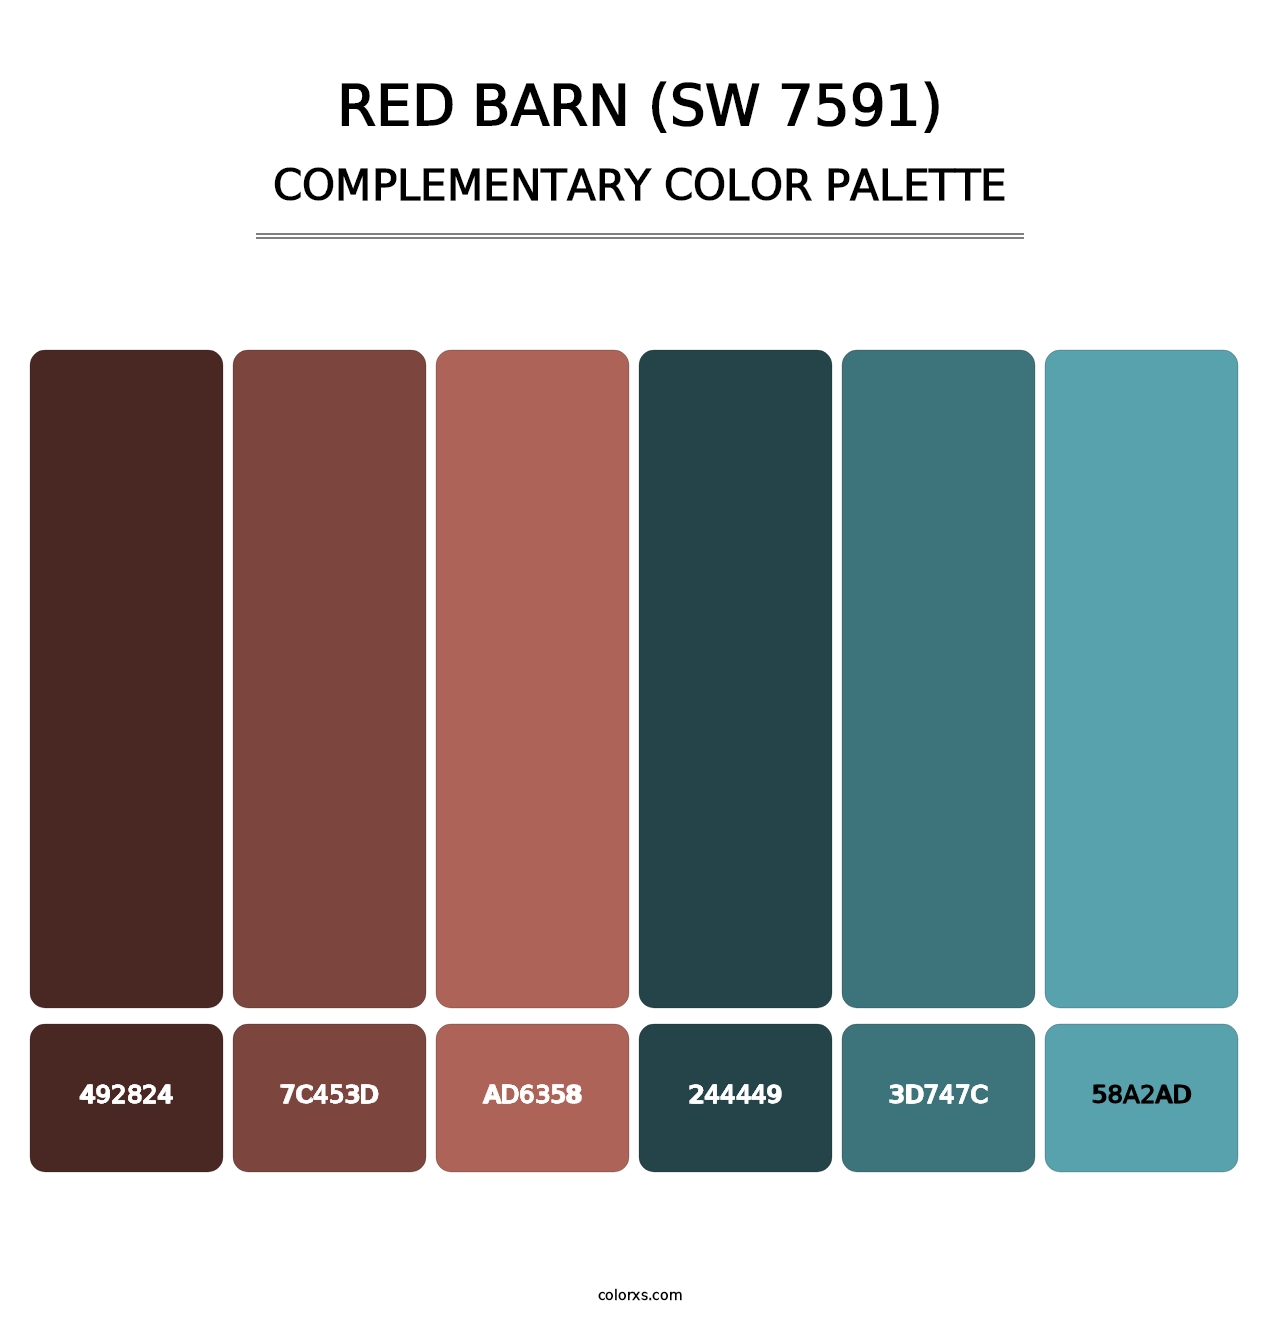 Red Barn (SW 7591) - Complementary Color Palette